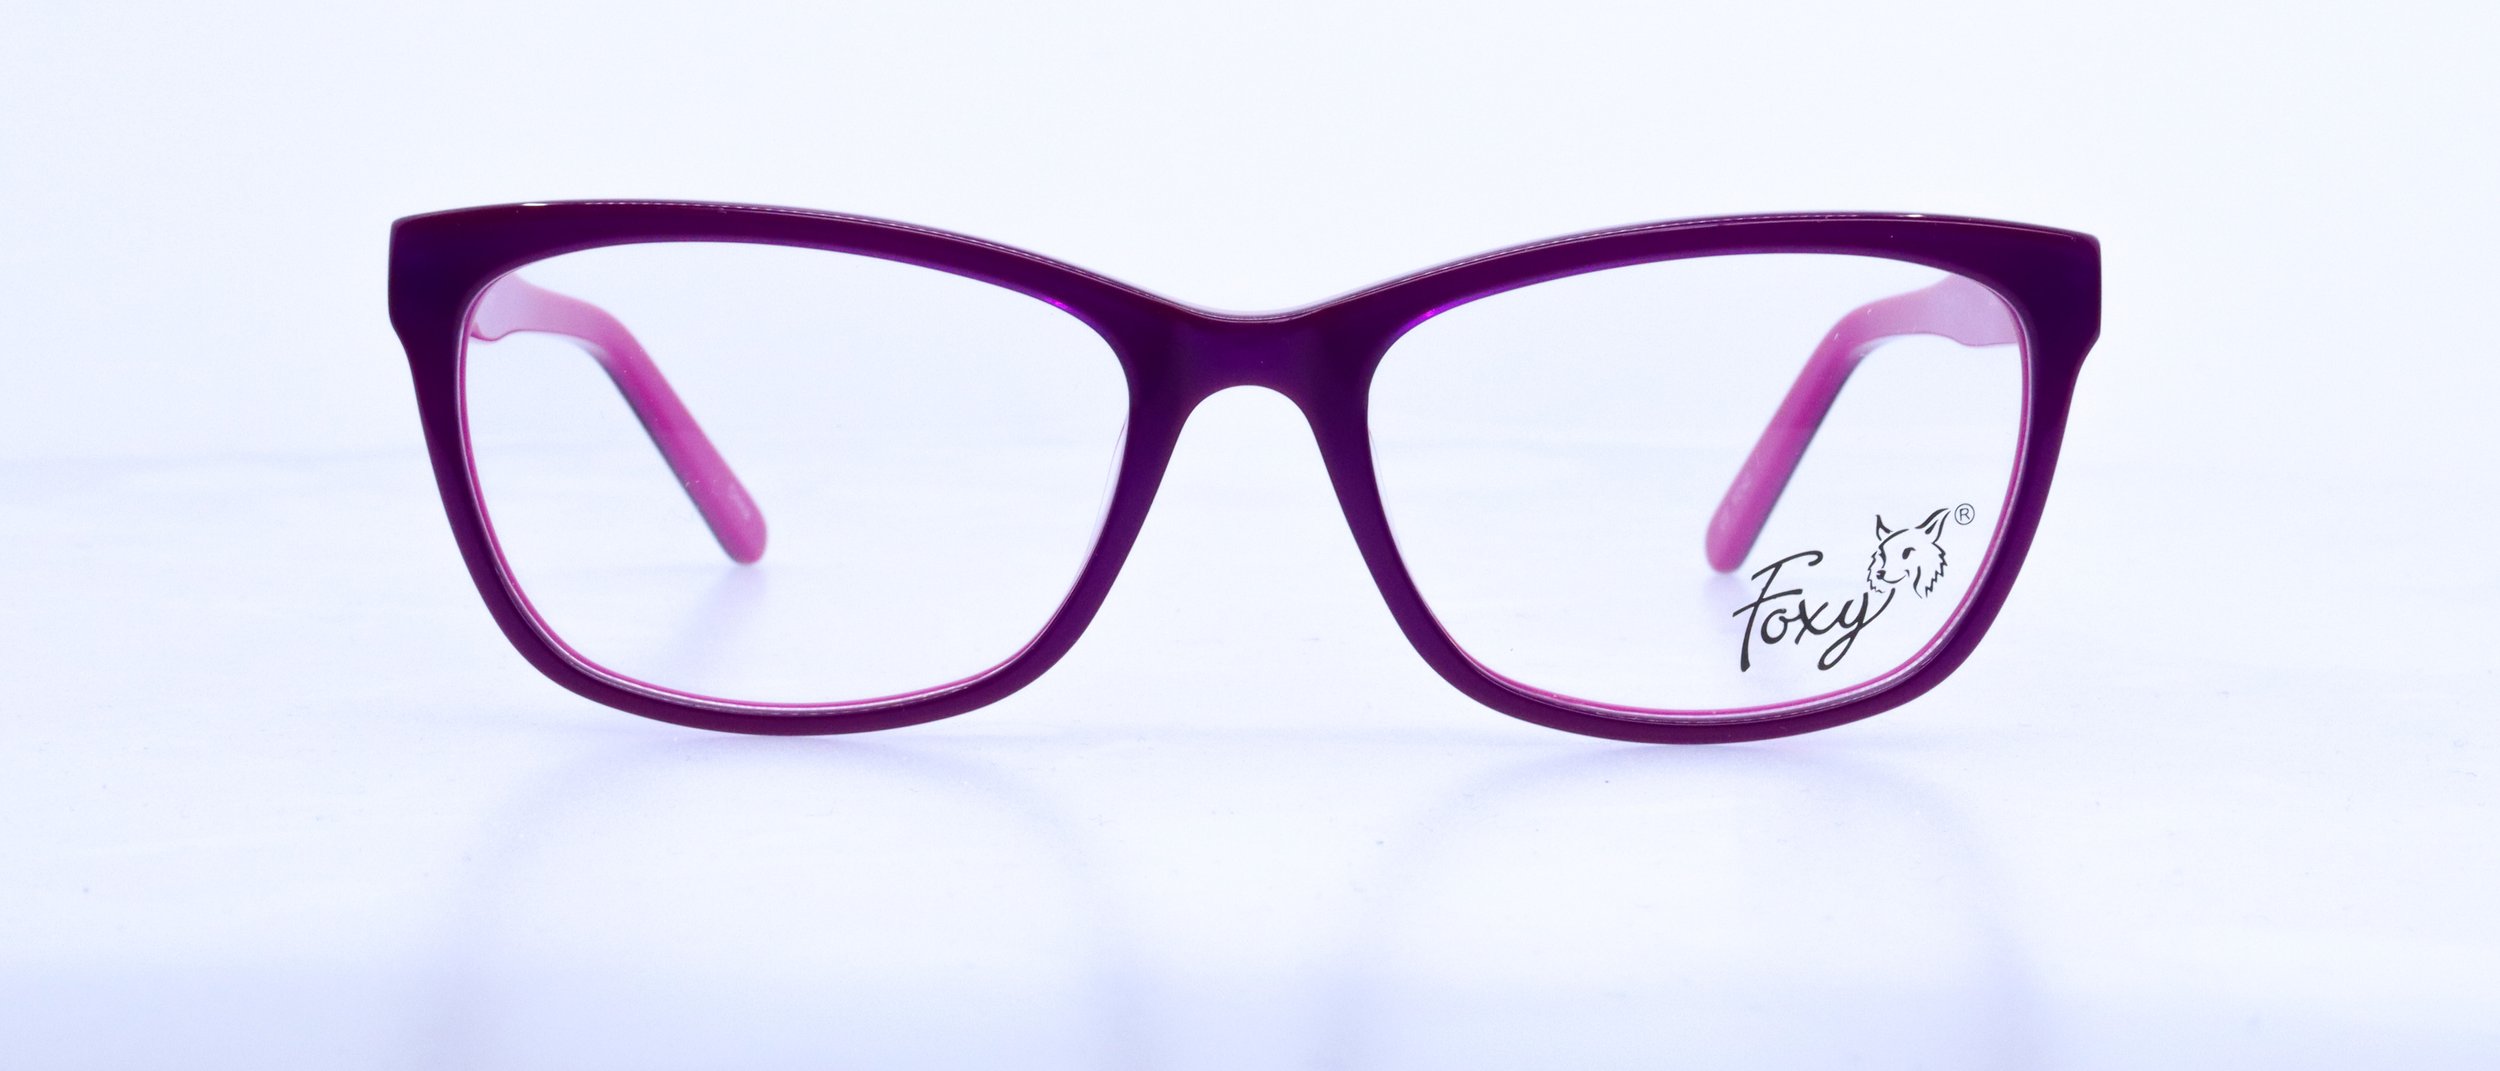  NEW COLOR!! Zoey: 55-18-140, Available in Purple, Burgundy, or Black/Blue 